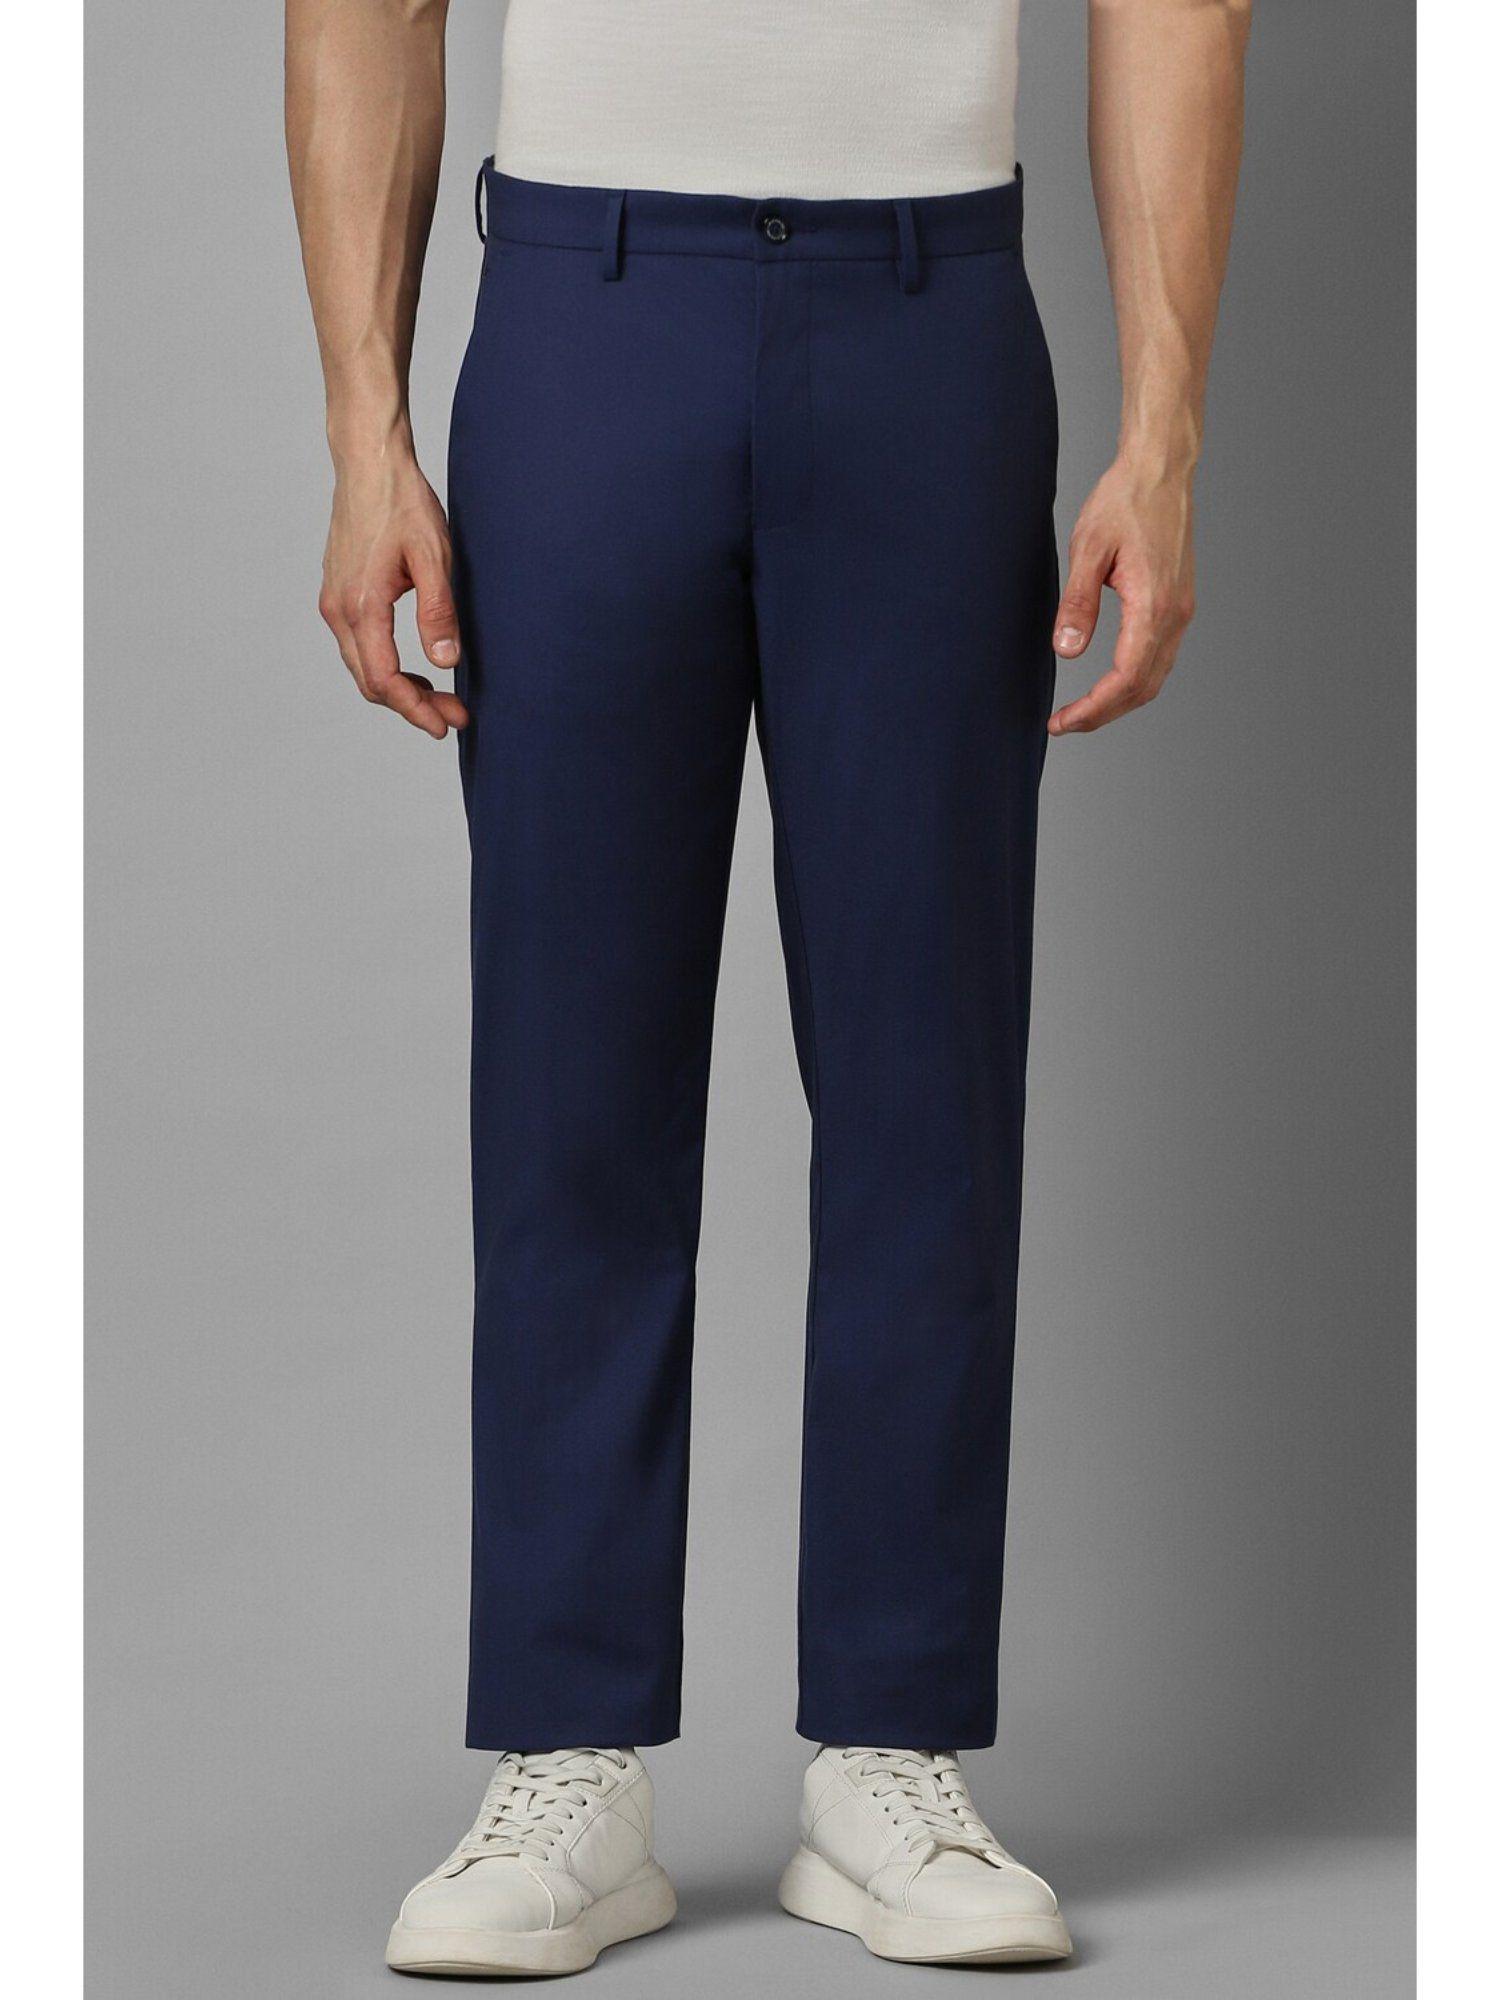 men-navy-regular-fit-solid-flat-front-casual-trousers